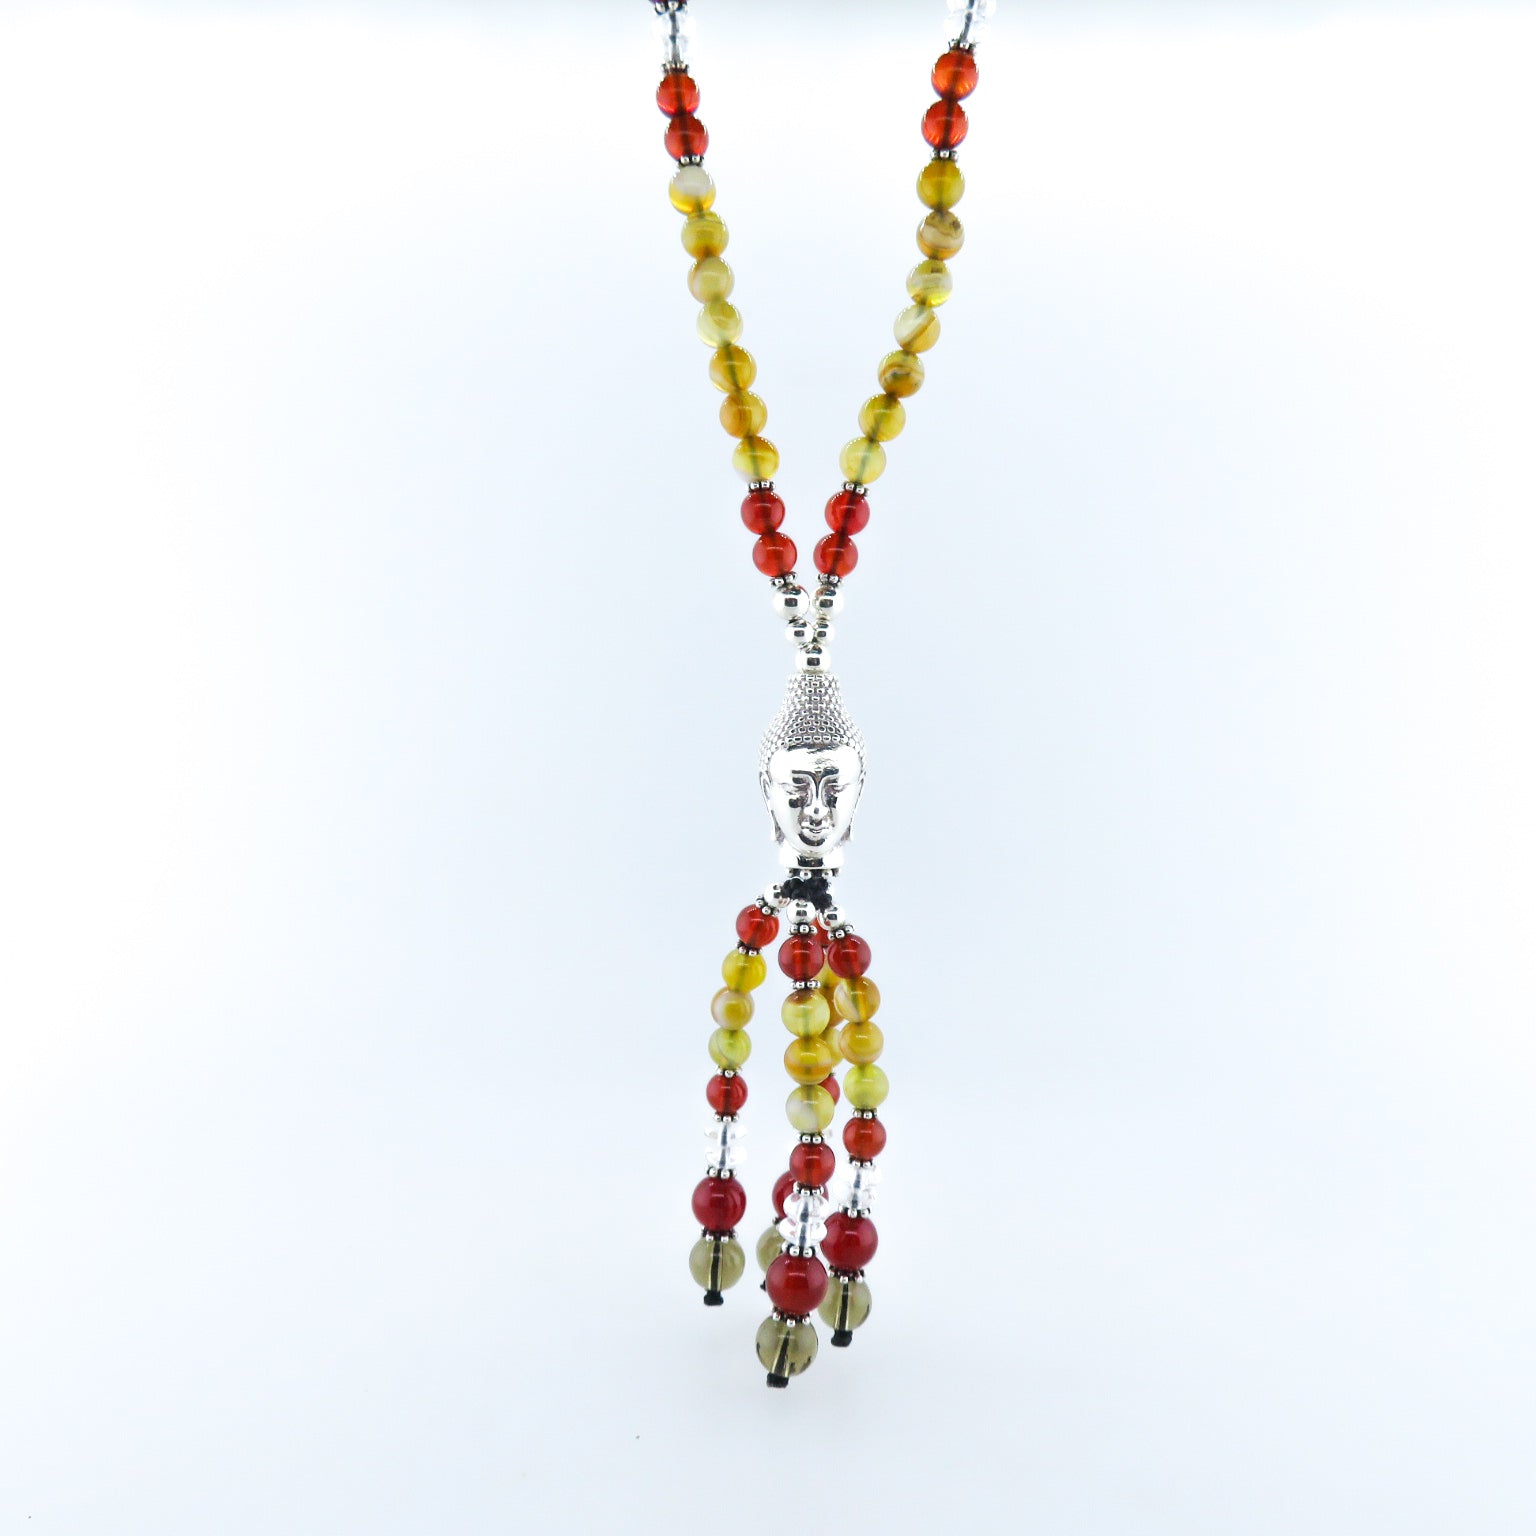 Agate Beads Necklace with Silver Buddha Head, Carnelian, Crystal, Smokey Quartz and Silver Beads